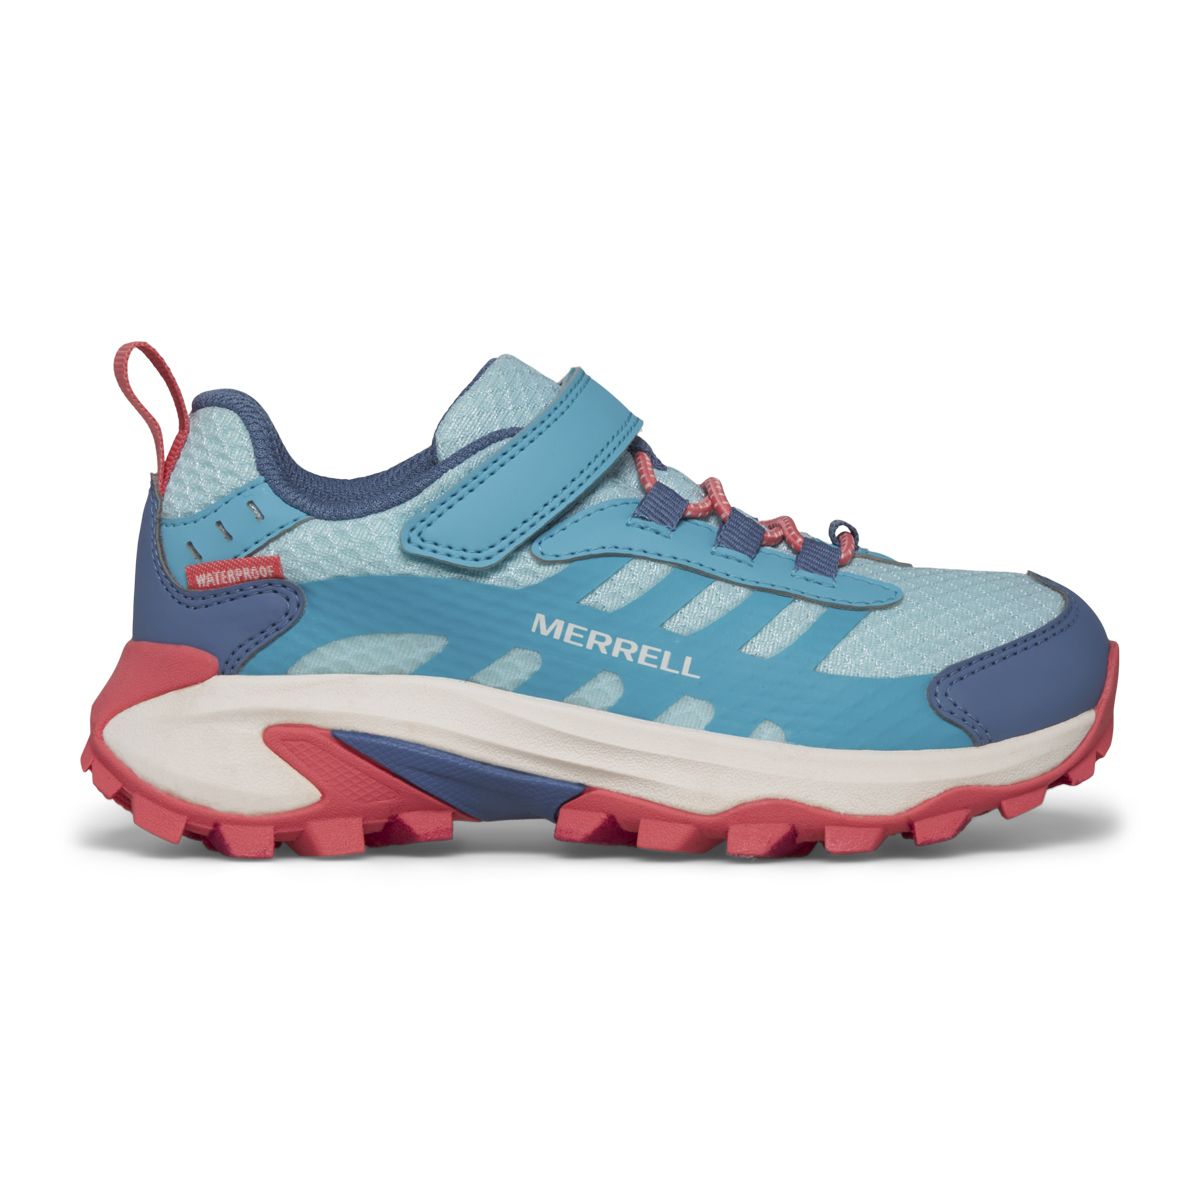 Moab Speed 2 Low A/C Waterproof, Turquoise/Coral, dynamic